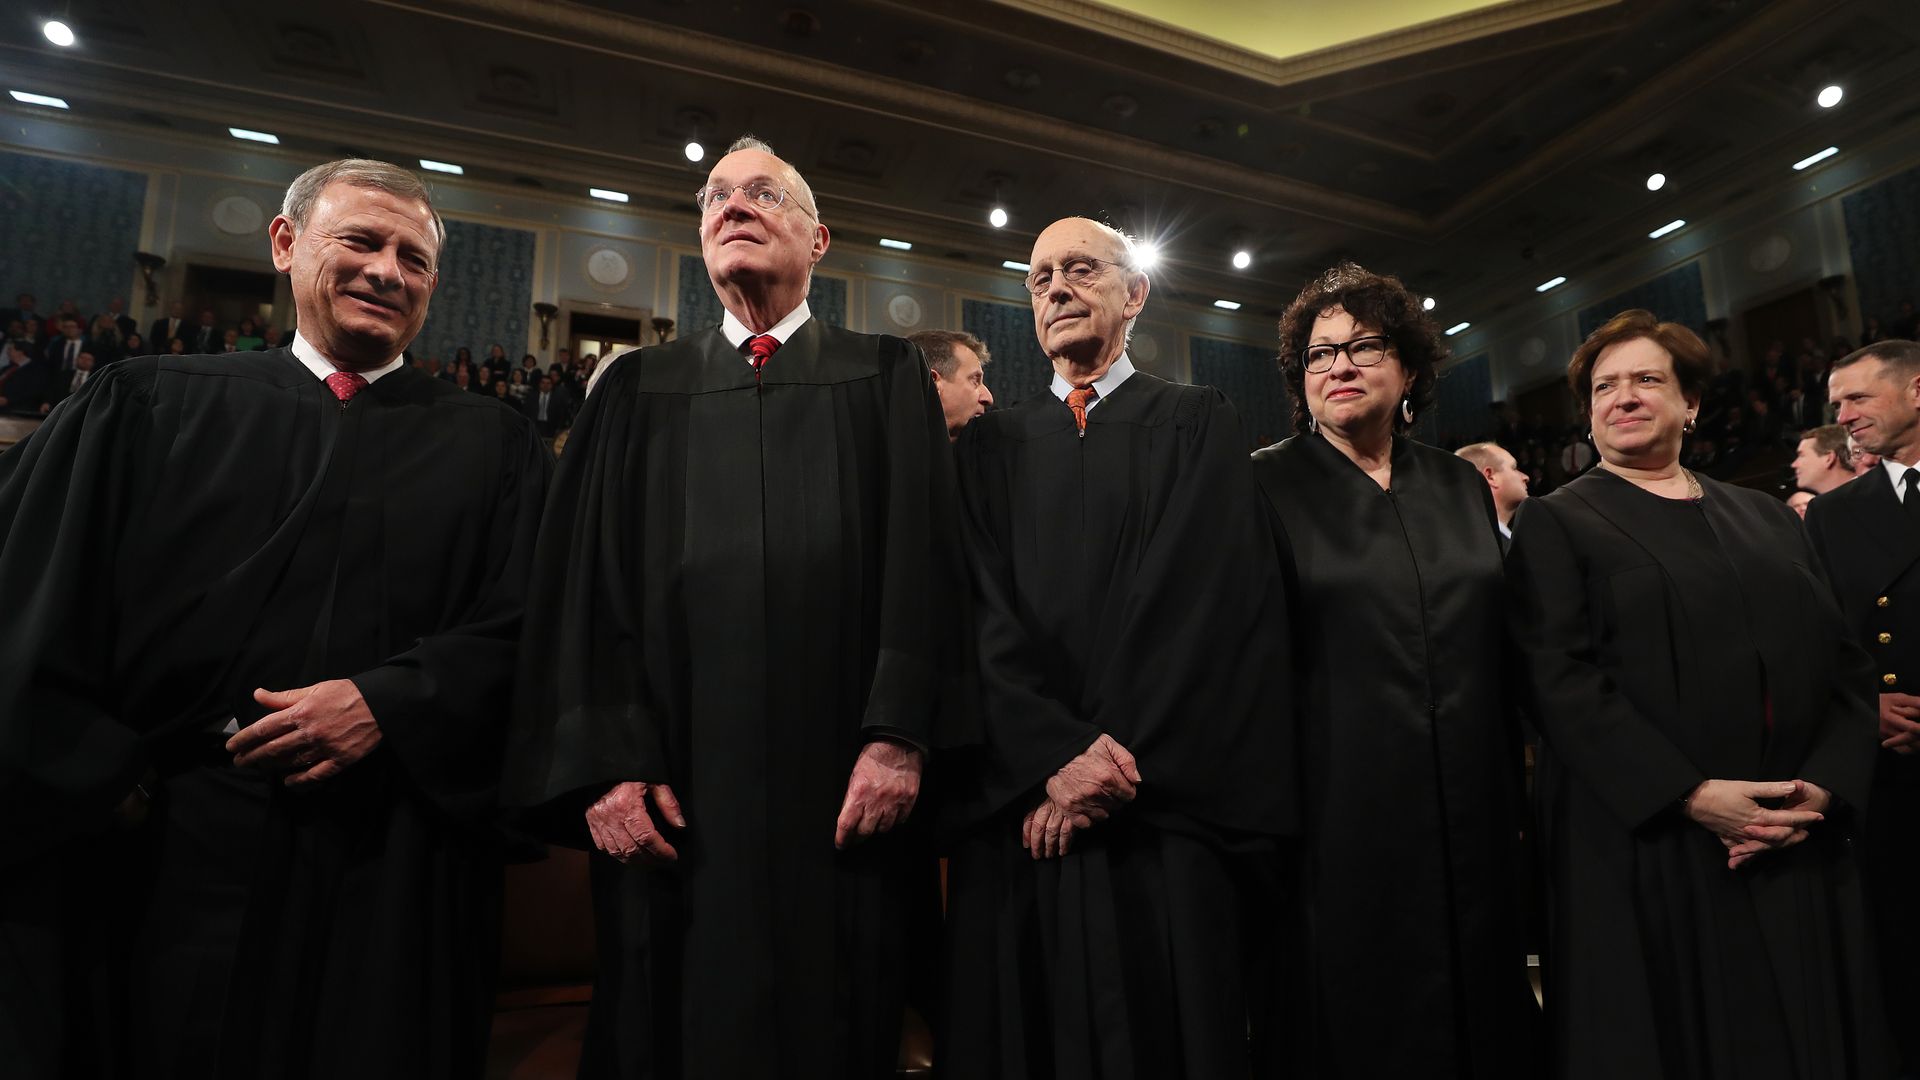 Justices of the Supreme Court of the United States stand in a row.